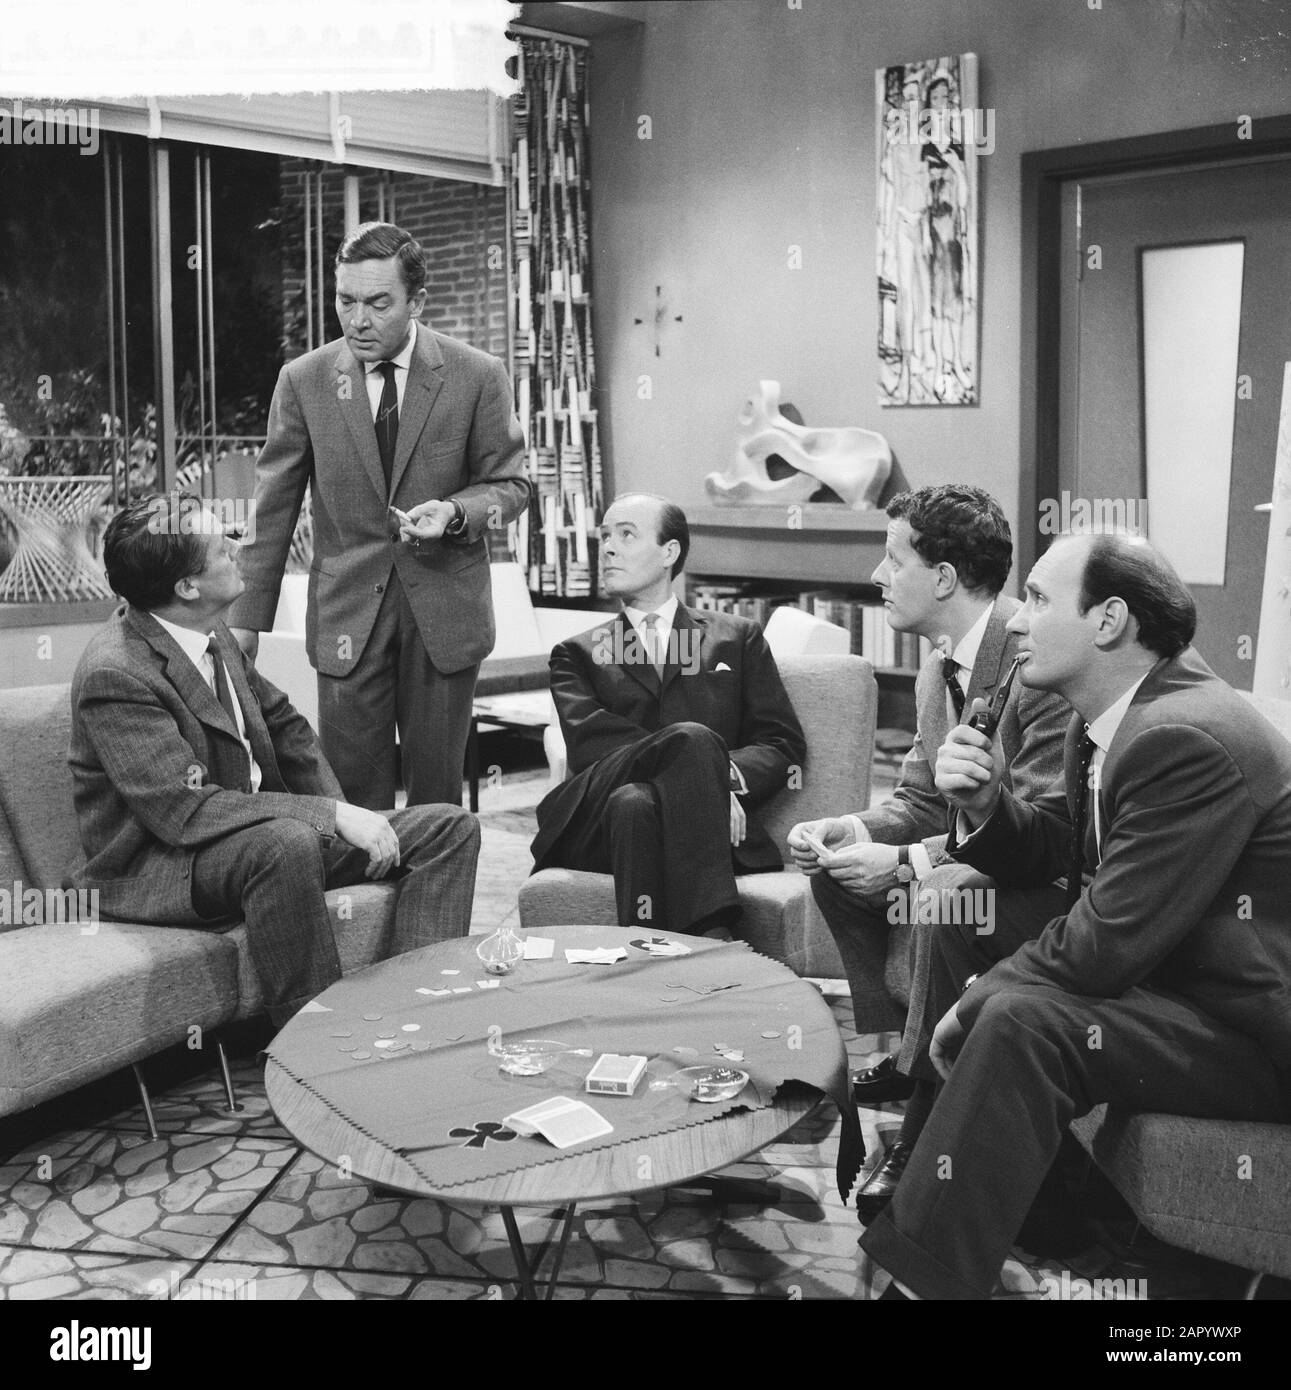 Television Title Poker. Andre van den Heuvel, Peter Aryans, Pim Dikkers, Luc Lutz Date: 8 June 1961 Keywords: Television epetitions Personal name: Dikkers, pim, Heuvel Andre van Den, Lutz, Luc Stock Photo